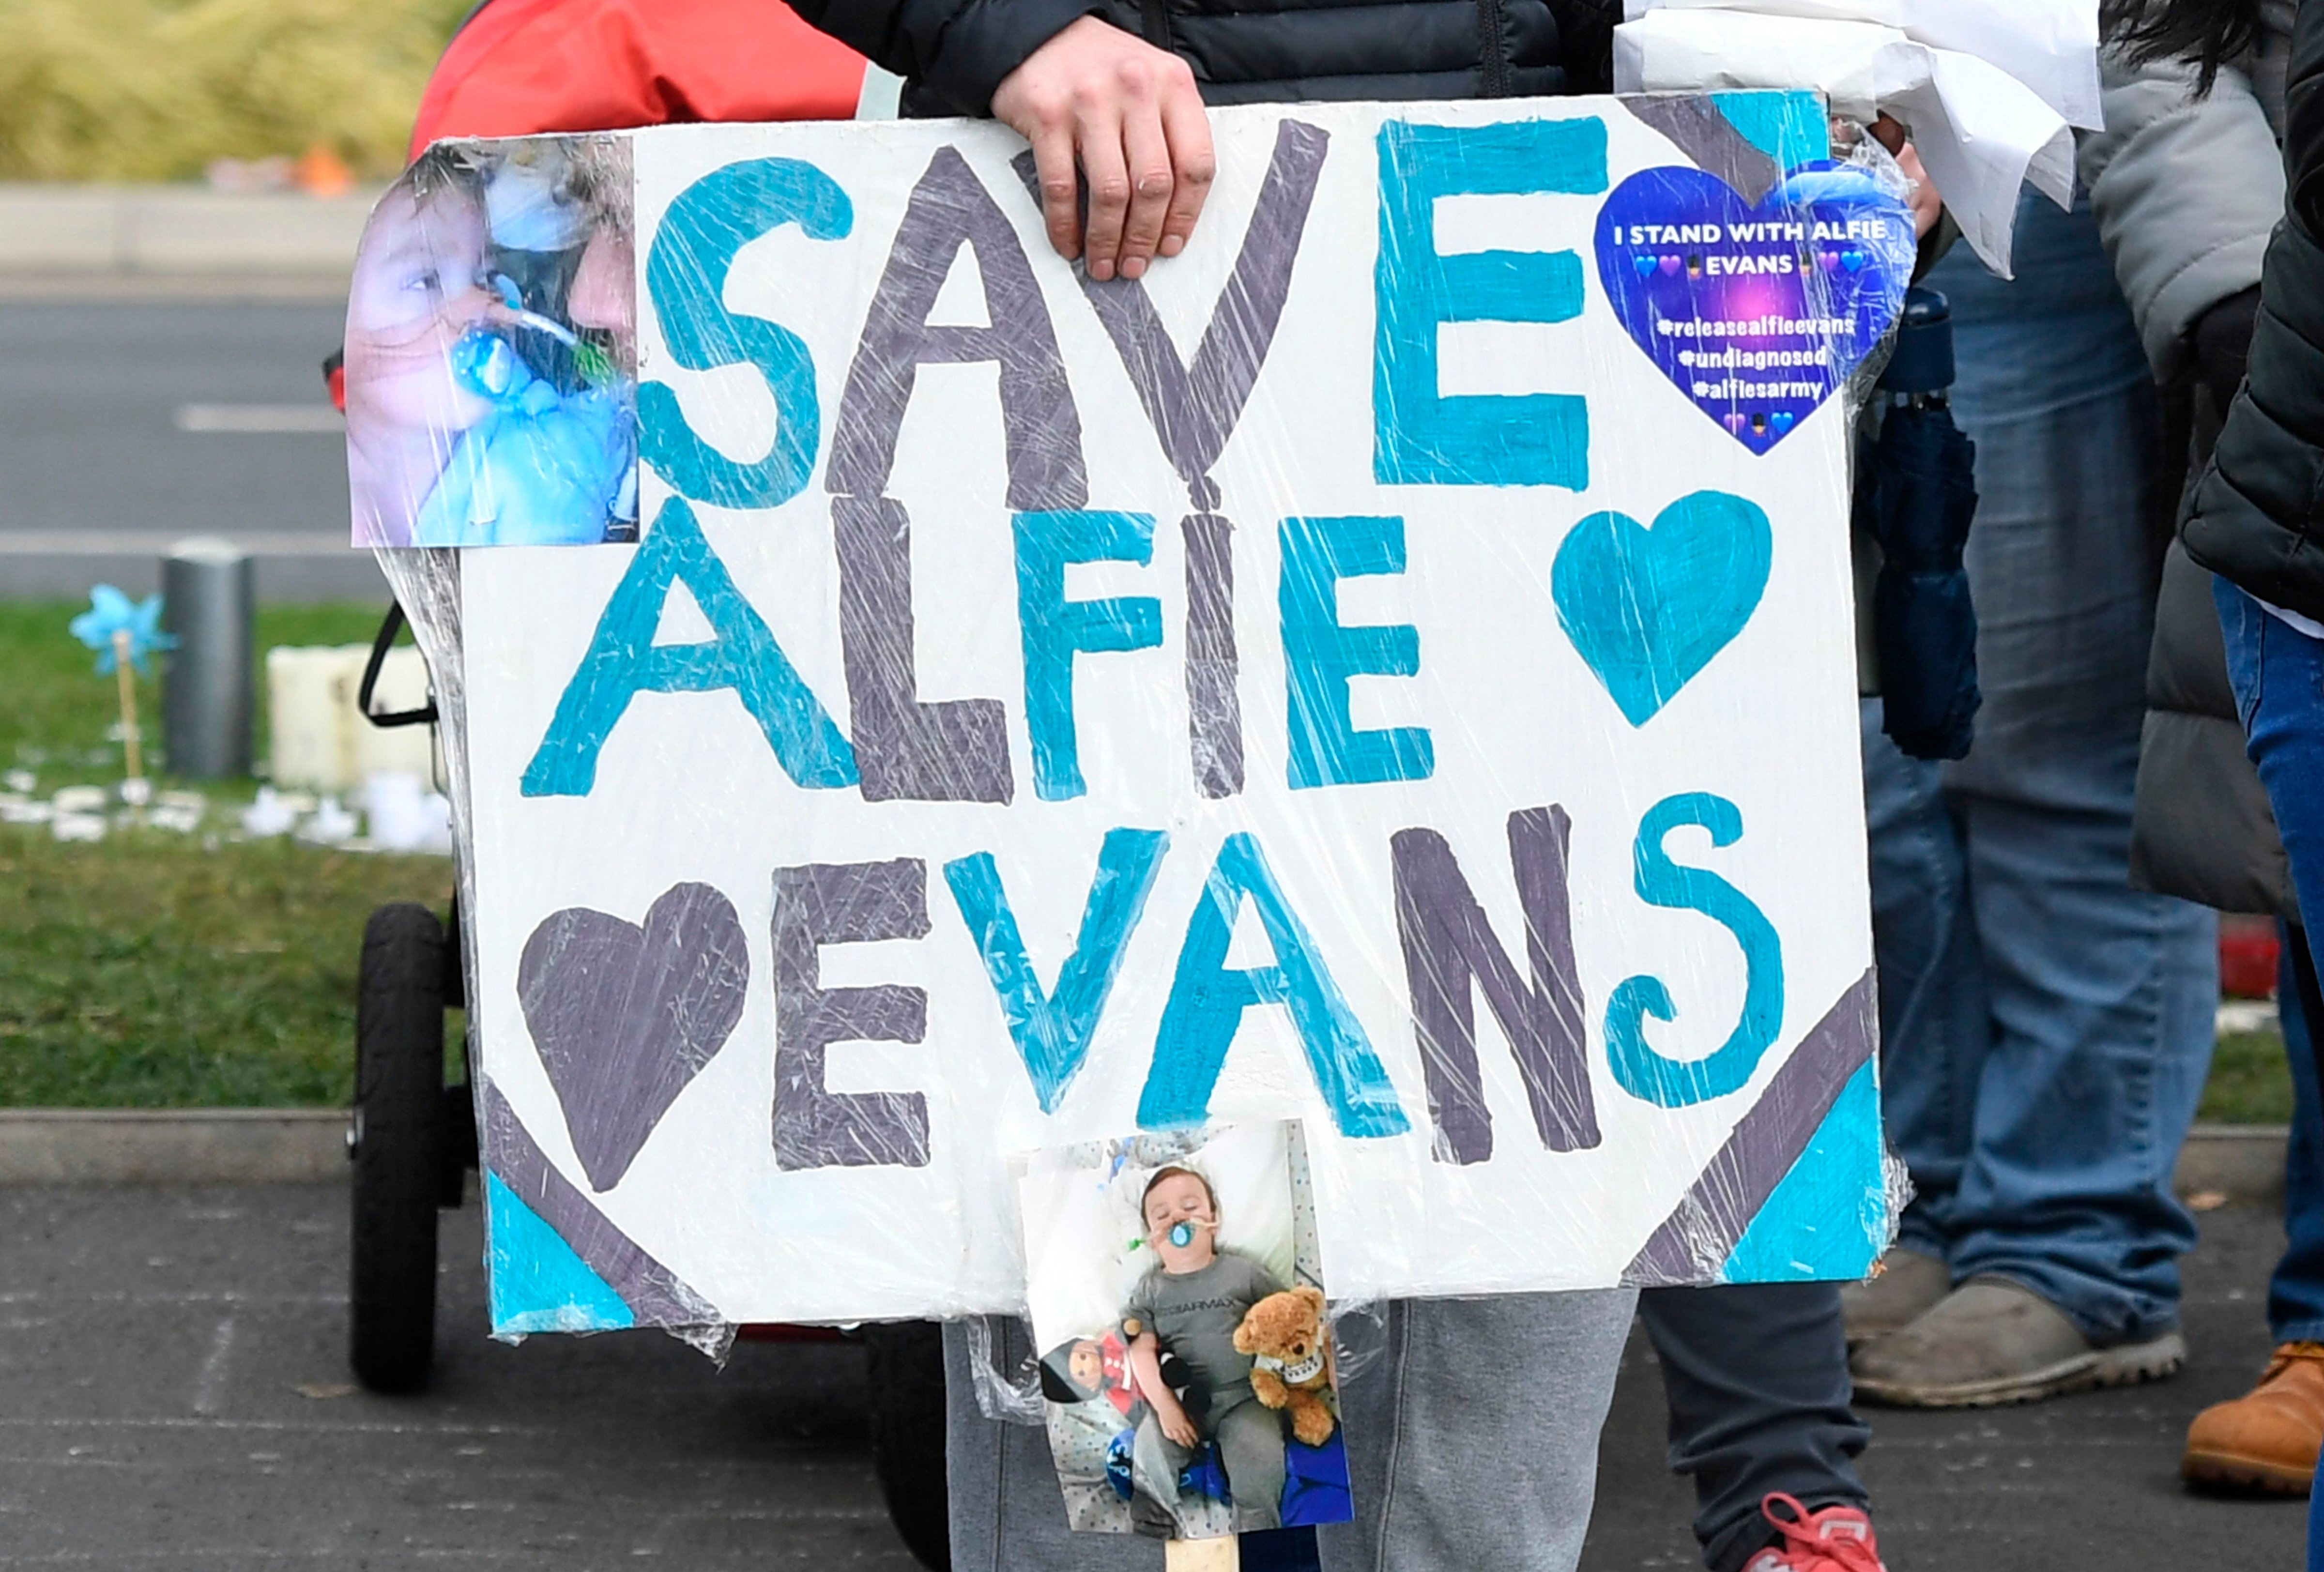 Supporters of seriously ill British toddler Alfie Evans demonstrate outside Alder Hey Children's Hospital in Liverpool, England, on April 16, 2018 as Court of Appeal (Paul Ellis—AFP/Getty Images)